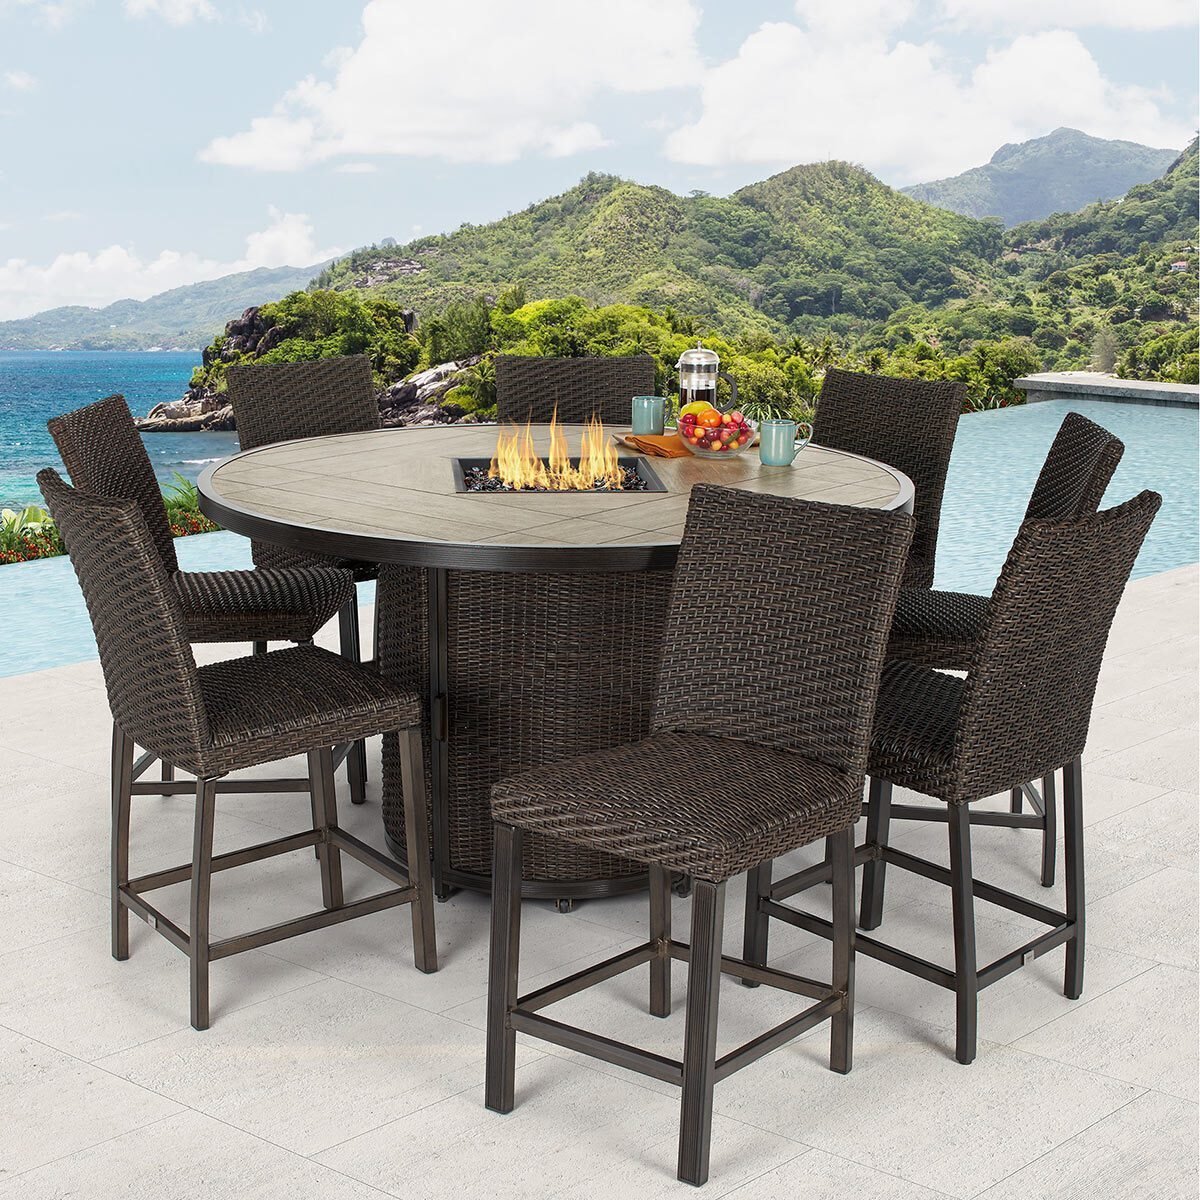 Agio Mckenzy 9 Piece High Dining Fire Chat Set + Cover - Signature Retail Stores